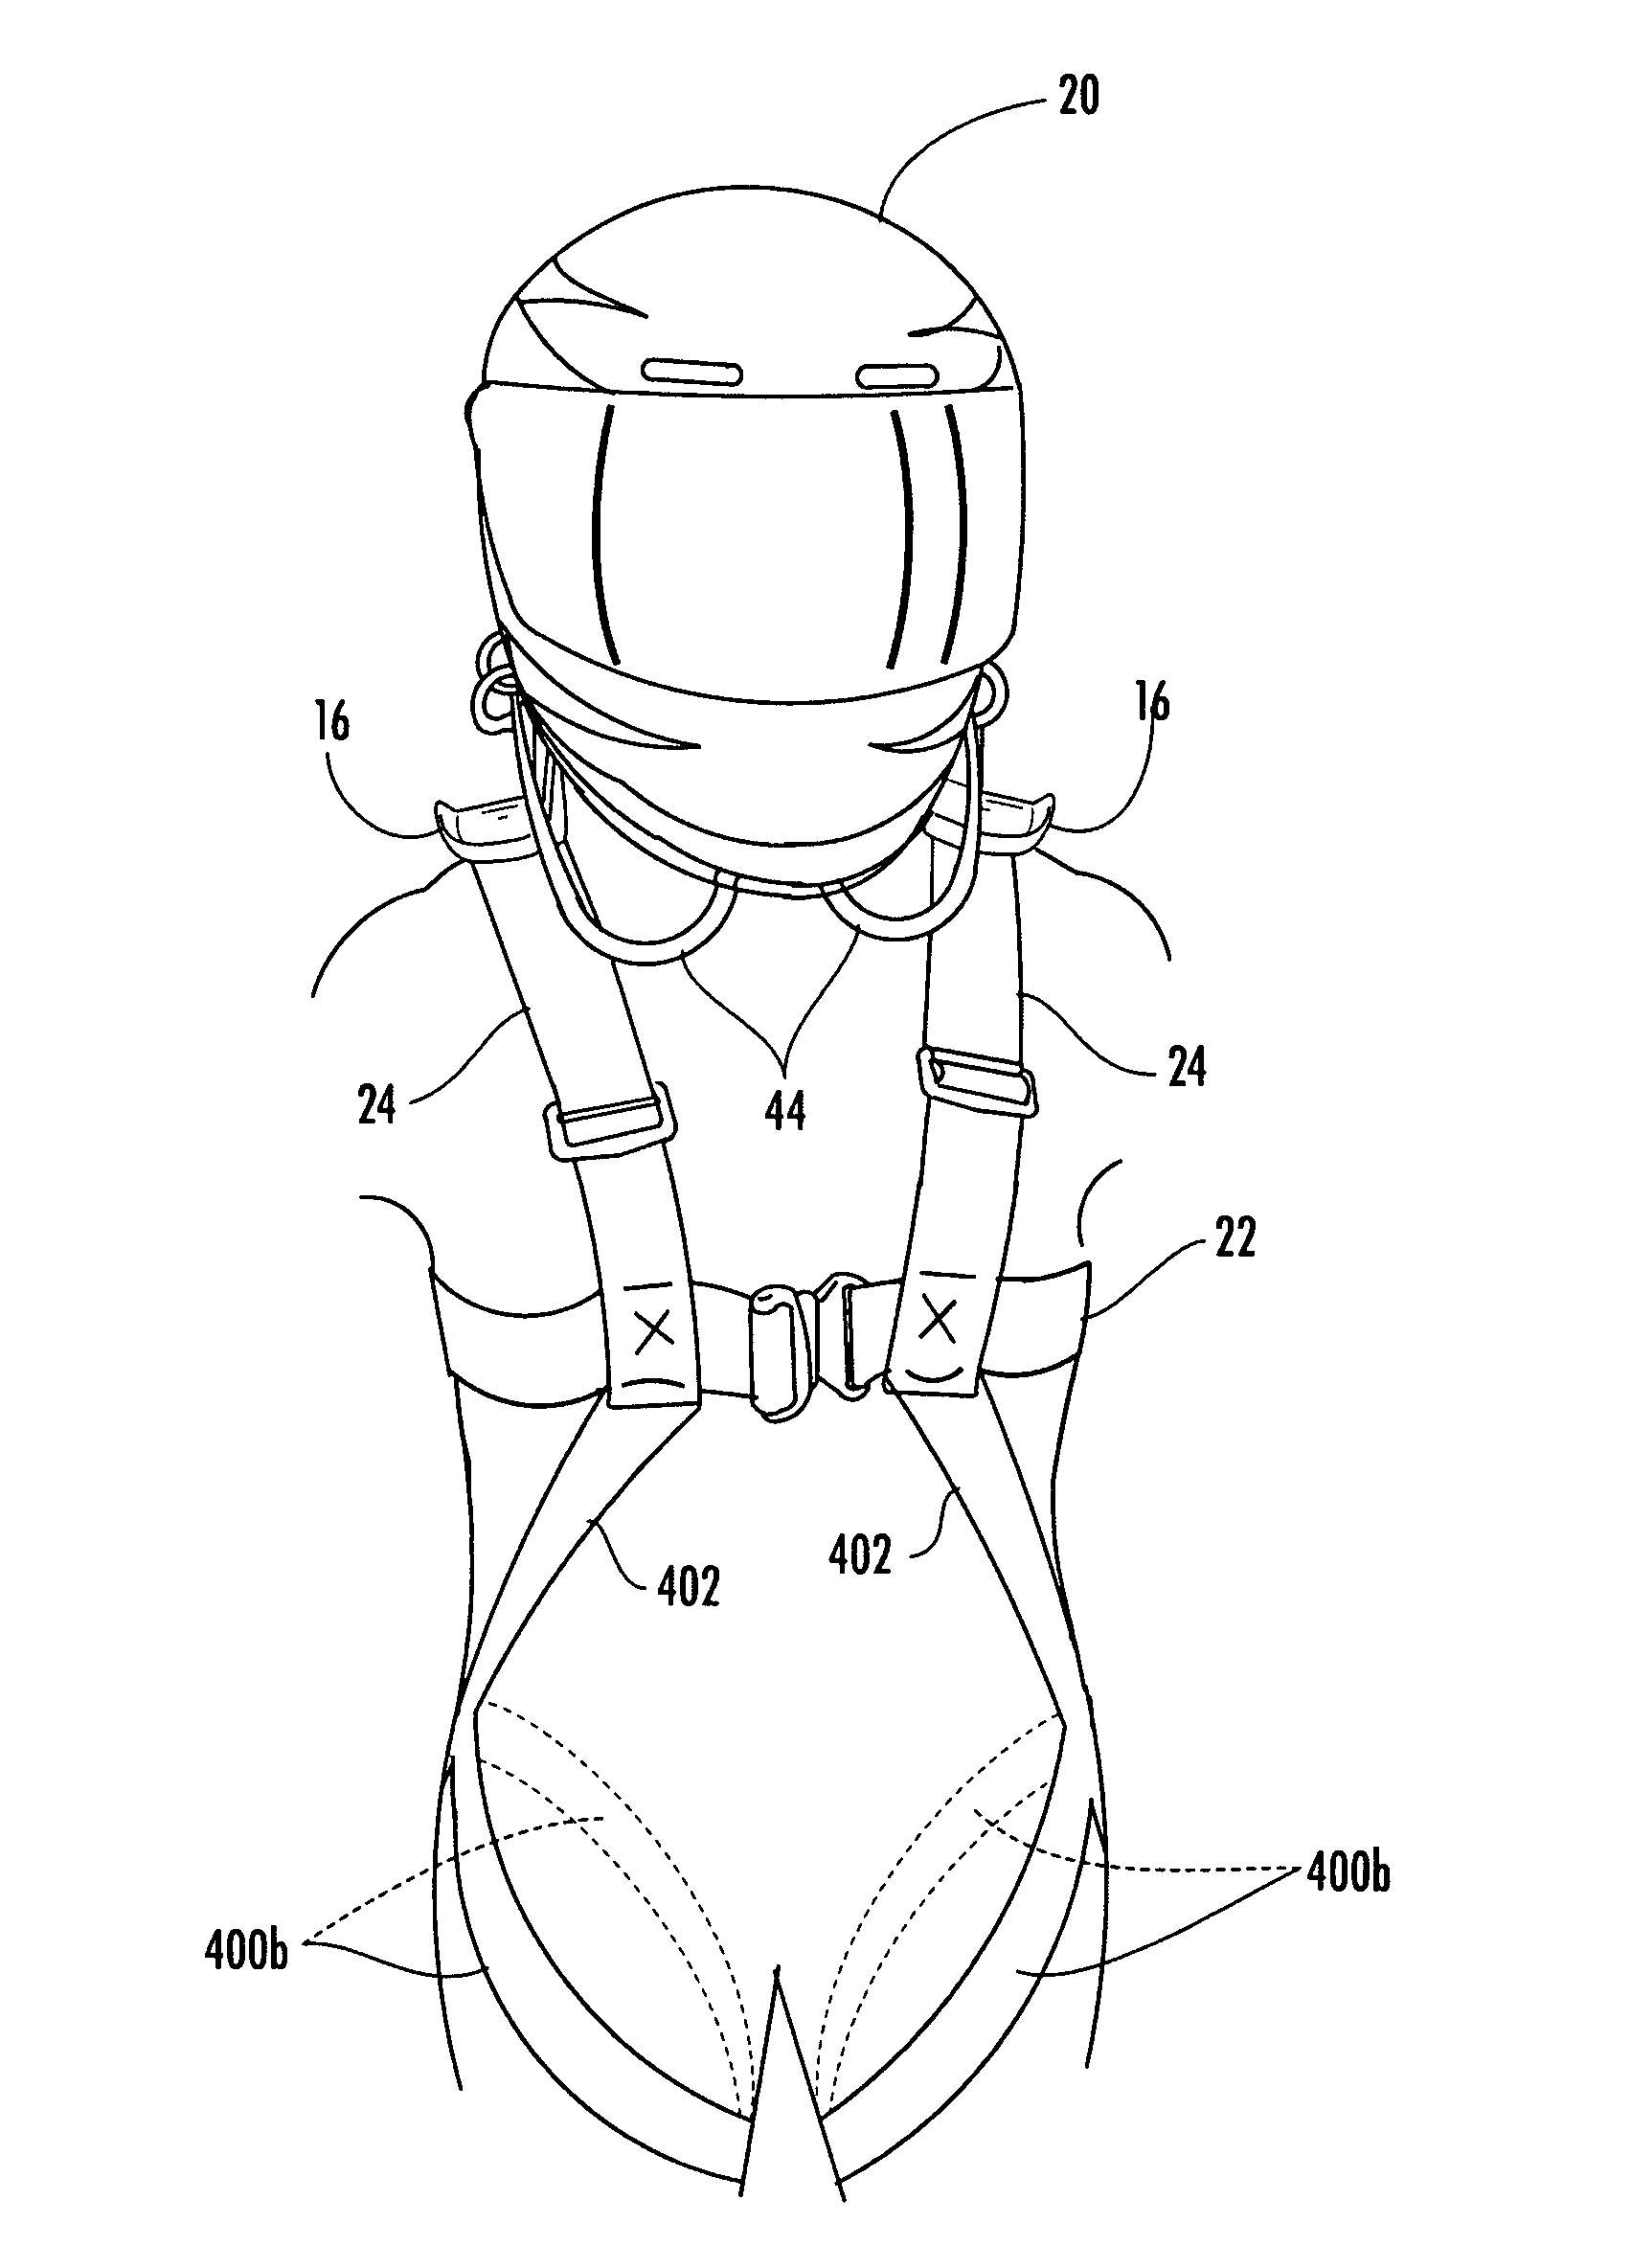 Head restraint device having a support member with back and shoulder portions